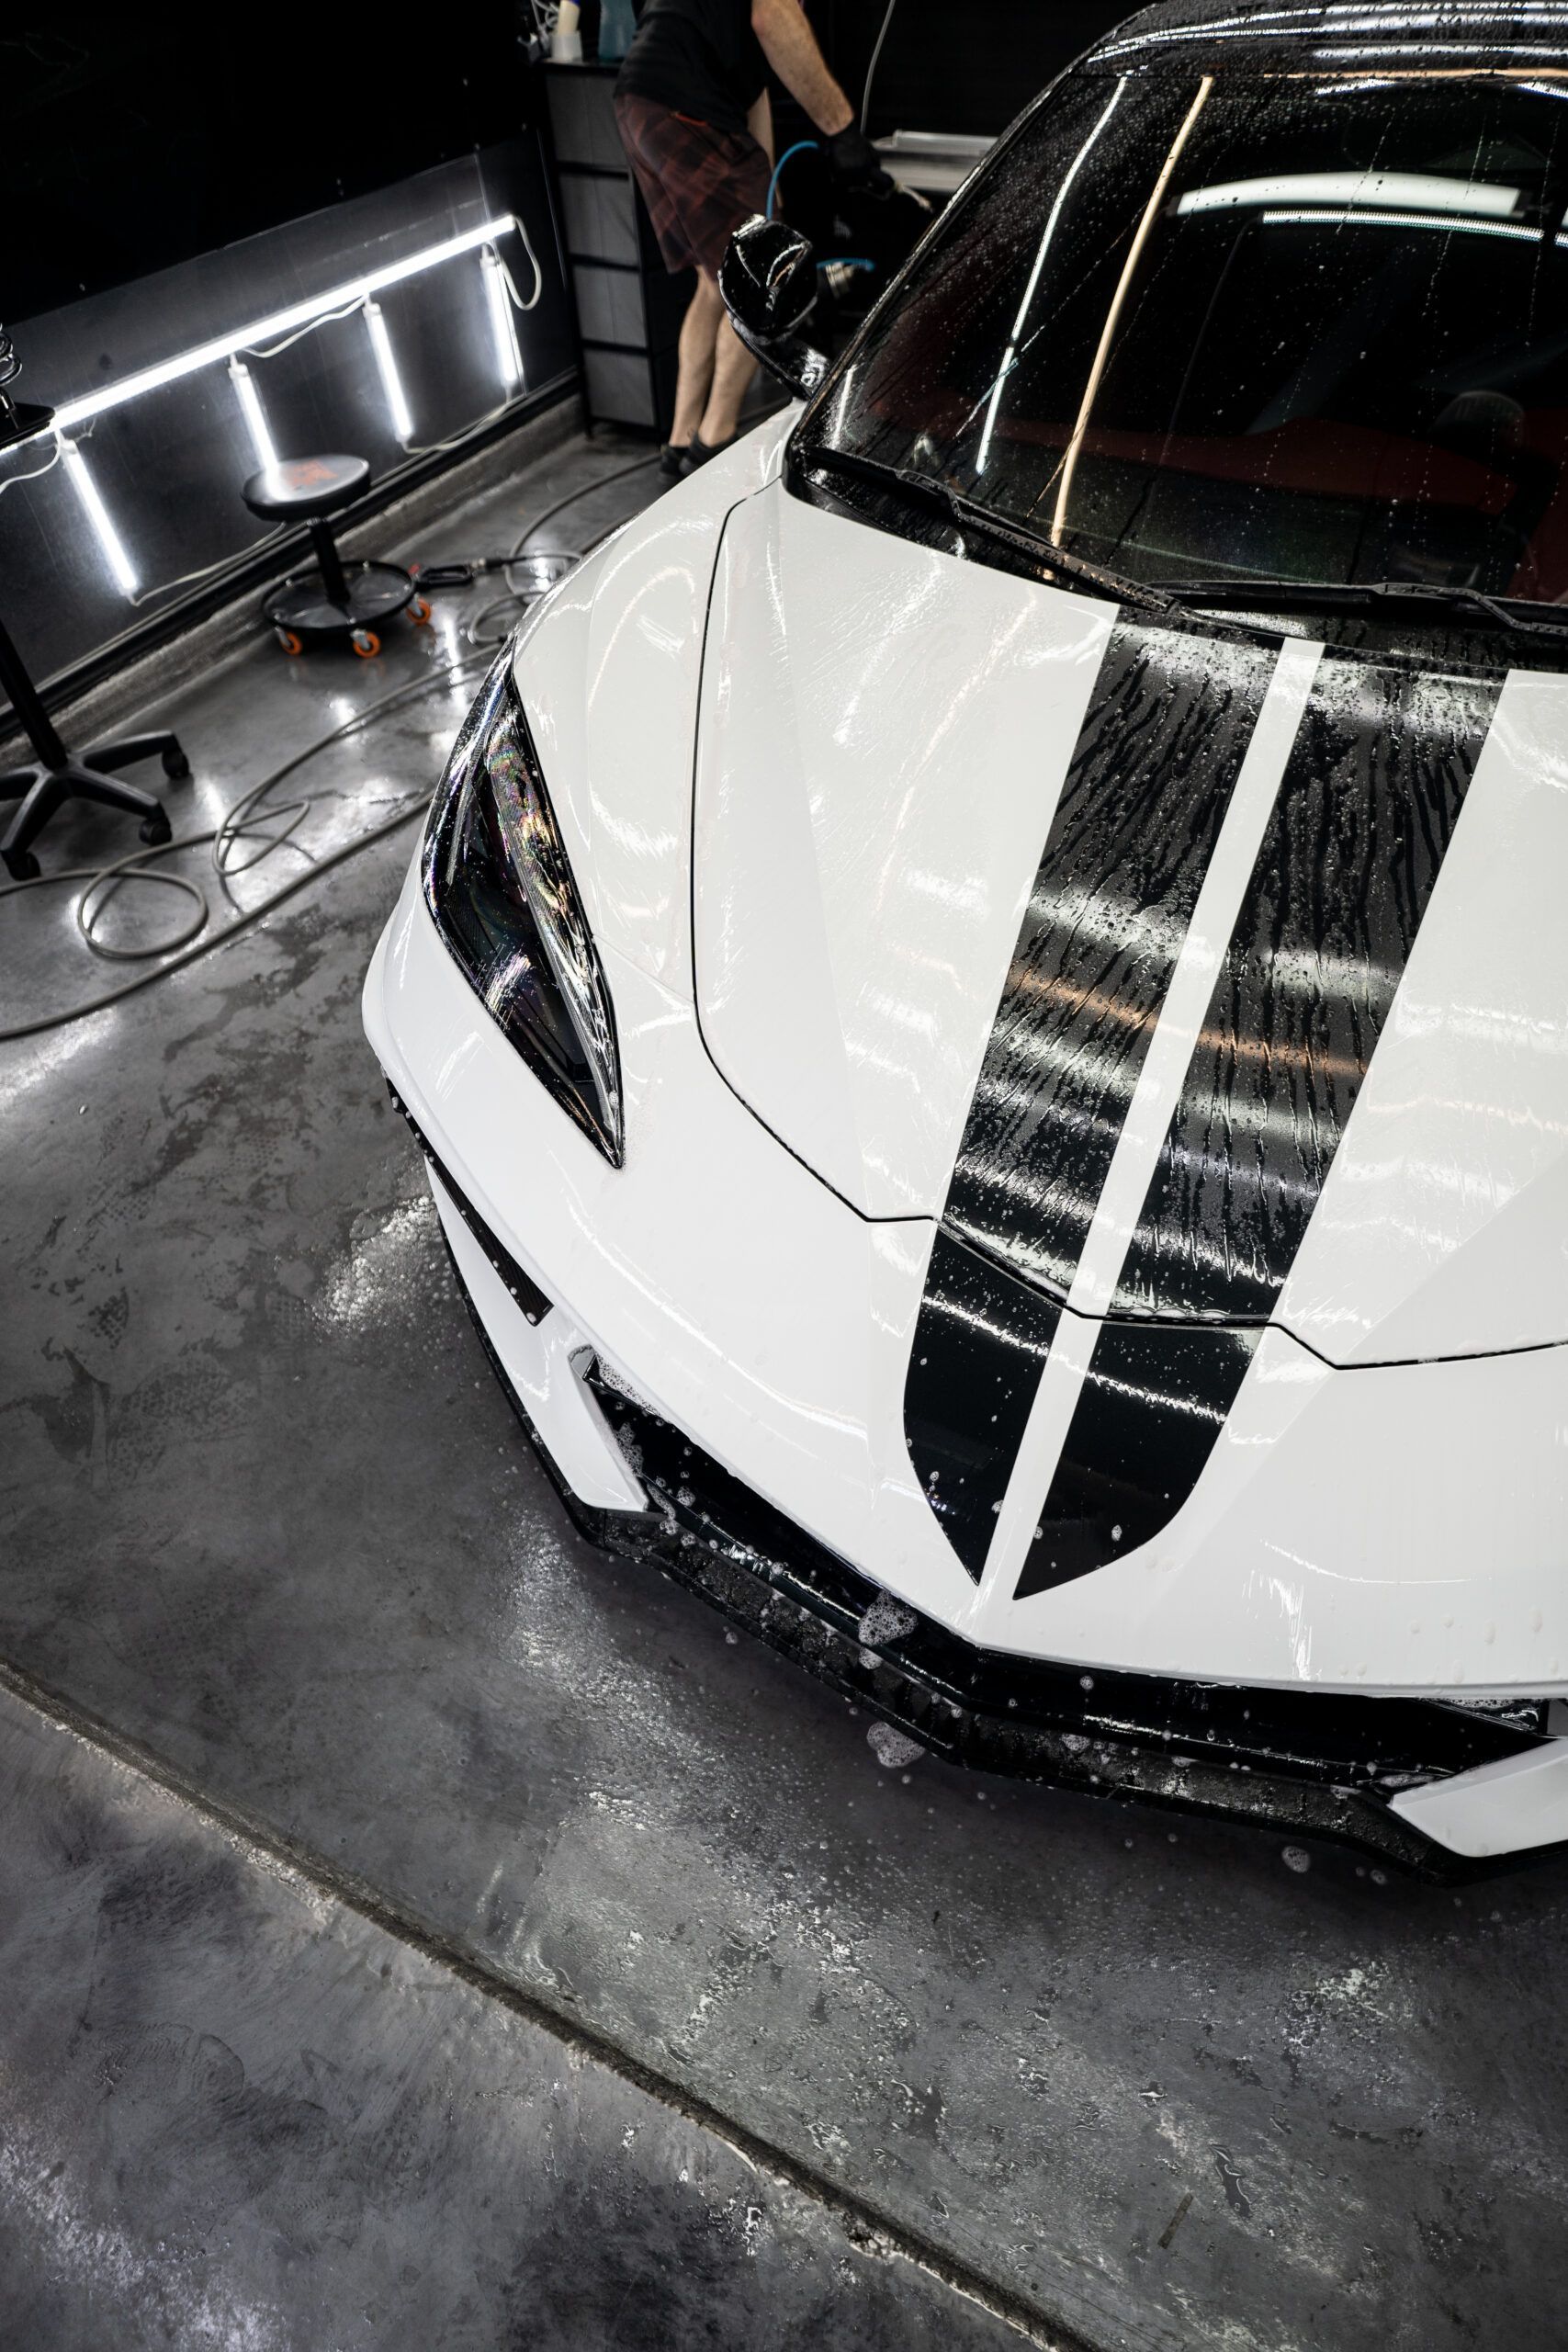 A white sports car with black stripes on the hood is being cleaned in a garage.